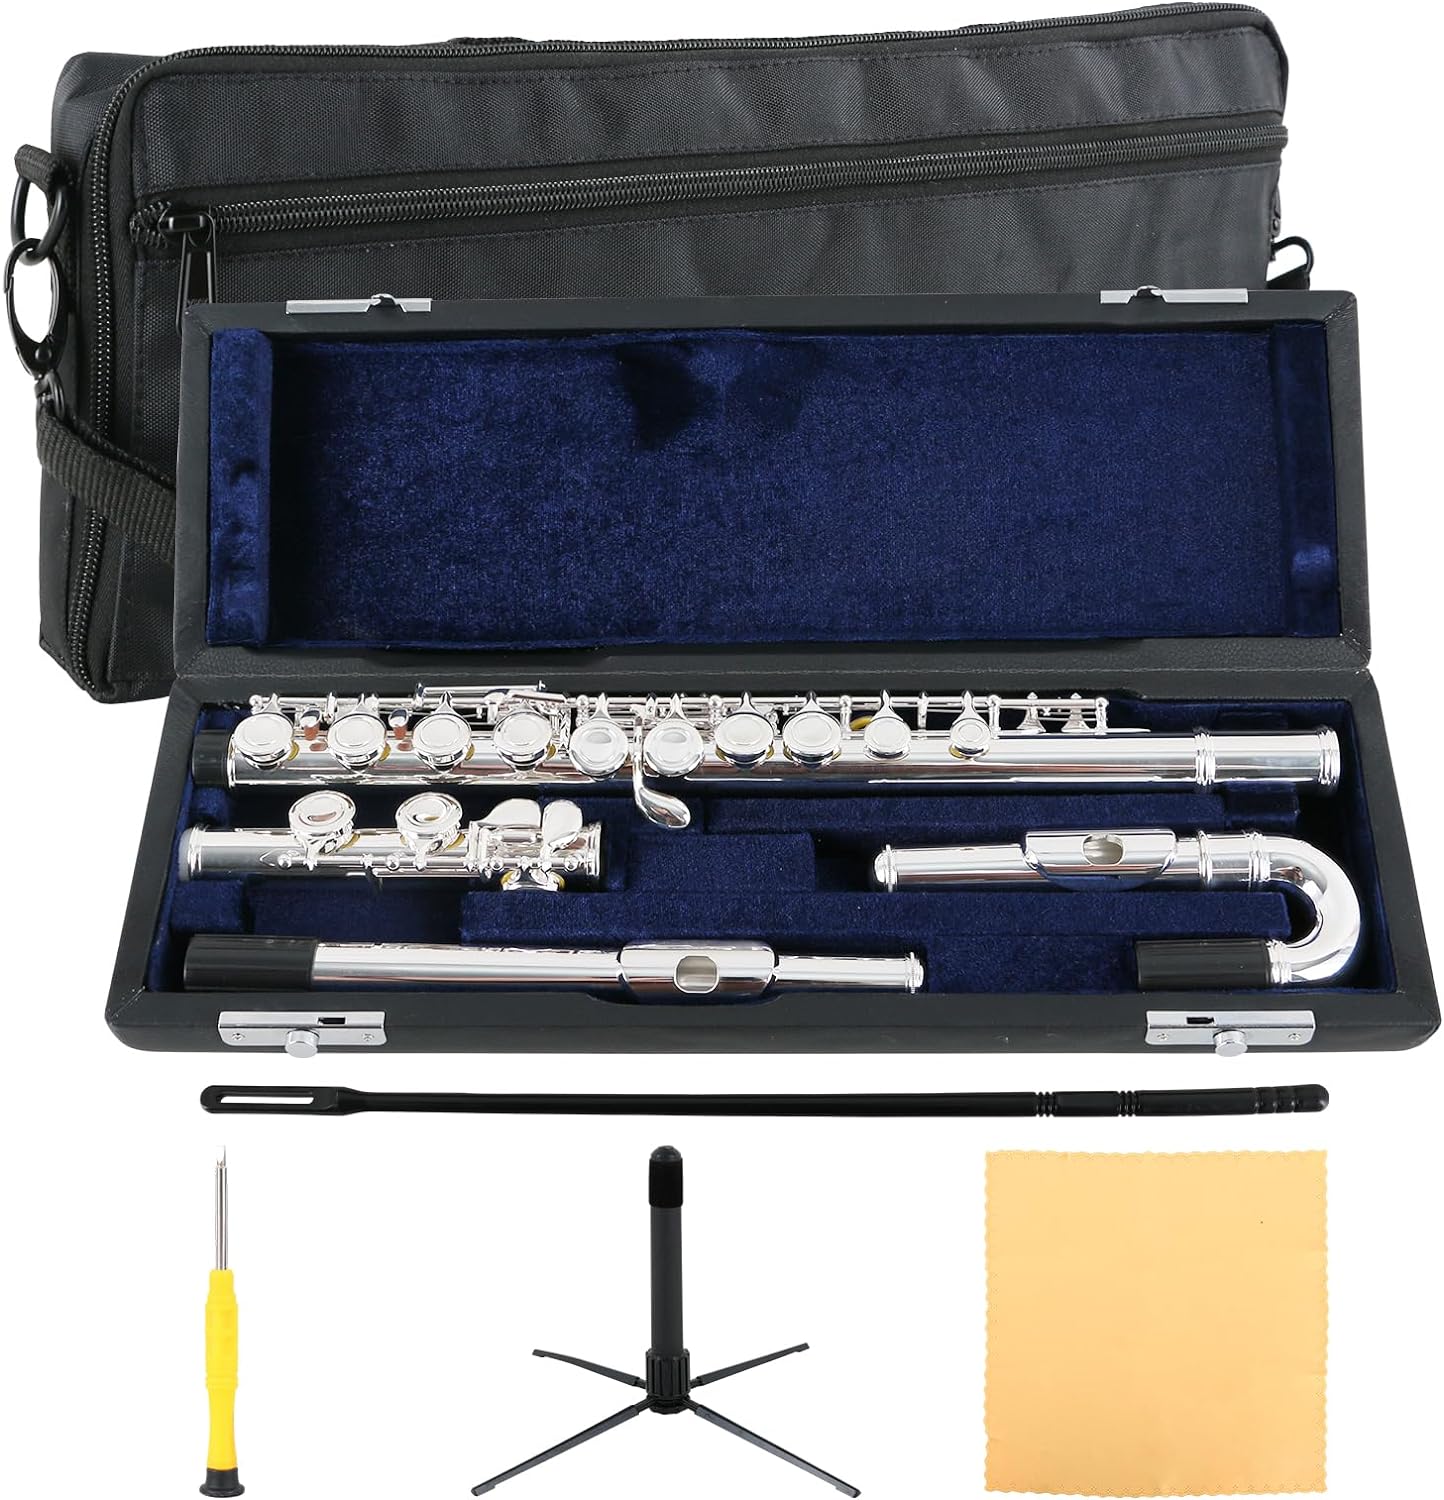 EASTROCK Silver Plated C Flute Closed Hole 16 Keys Flute Instrument with Curved Head Joint Mouthpiece Replacement,Cleaning Kit,Stand,Carrying Case,Gloves,Tuni